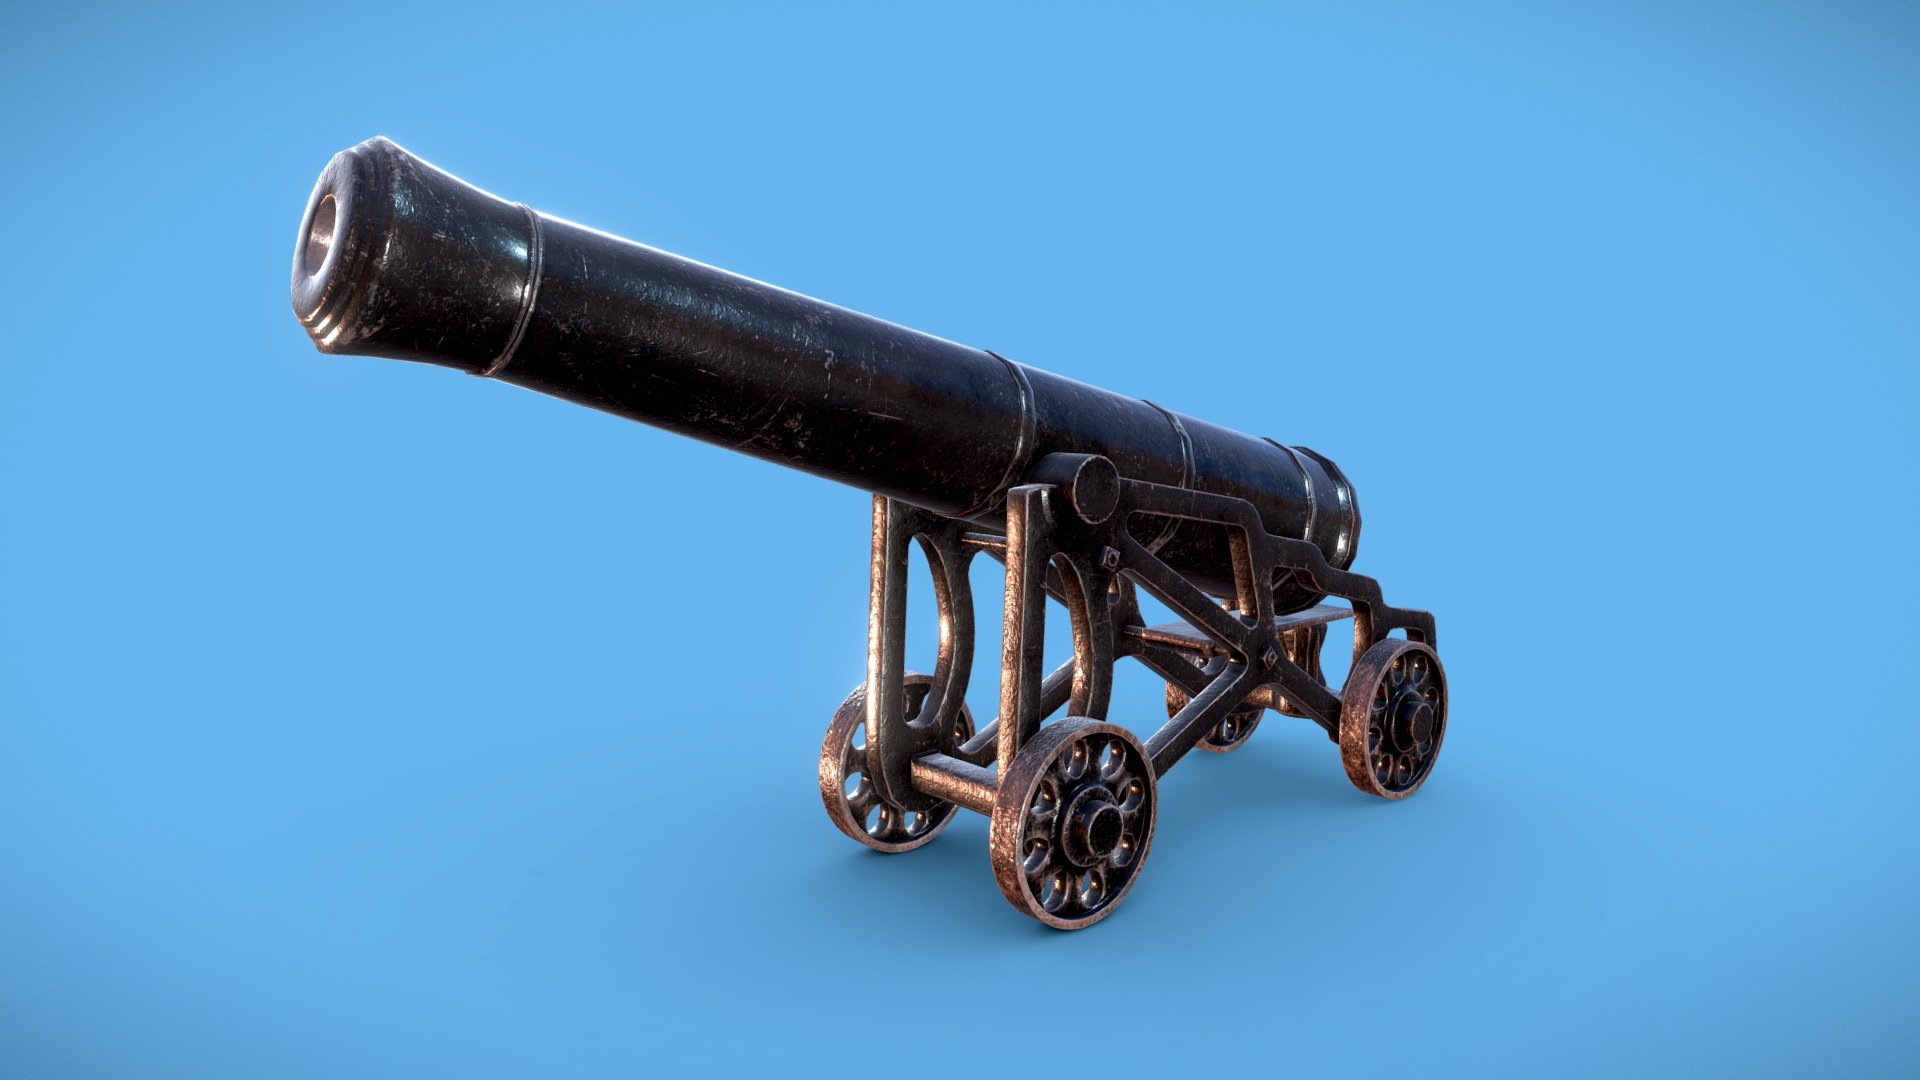 Textures created in Substance Painter and exported out as .PNG

Logically named onjects, materials and textures

modelled in Blender 2.93

Built to real world scales

Fully UV unwrapped

Tested in Marmoset, cycles and EEVEE

Rigged and game ready


Objects included



Cannon.Body

Cannon.Cannon

Cannon.Wheel (x4)

CannonRig


Textures included (4K)



Base colour

Roughness

Metallic

Normal (OpenGL)

AO


Poly Counts



Faces: 12,757

Verts:  13,081

Triangulated: 25,514
 - Bromfield Cannon - Buy Royalty Free 3D model by PBR3D 3d model